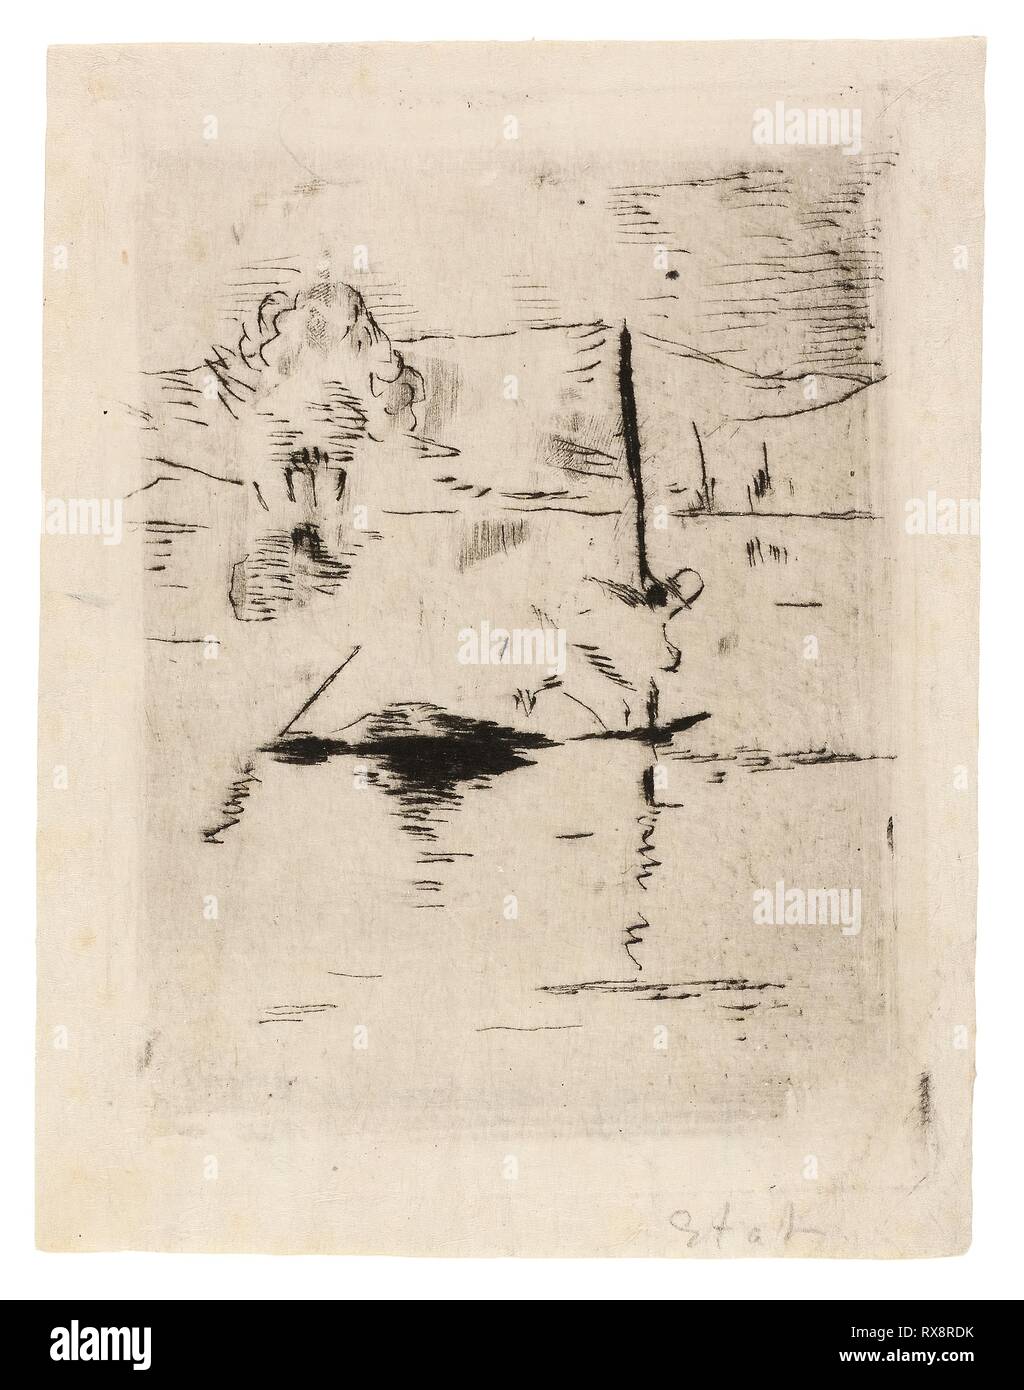 The River in the Plain. Édouard Manet (French, 1832-1883); printed by Auguste Delâtre (French, 1822-1907); written by Charles Cros (French, 1842-1888). Date: 1874. Dimensions: 106 × 80 mm (image); 116 × 88 mm (plate); 129 × 99 mm (sheet). Etching and drypoint in black on ivory Japanese paper. Origin: France. Museum: The Chicago Art Institute. Stock Photo